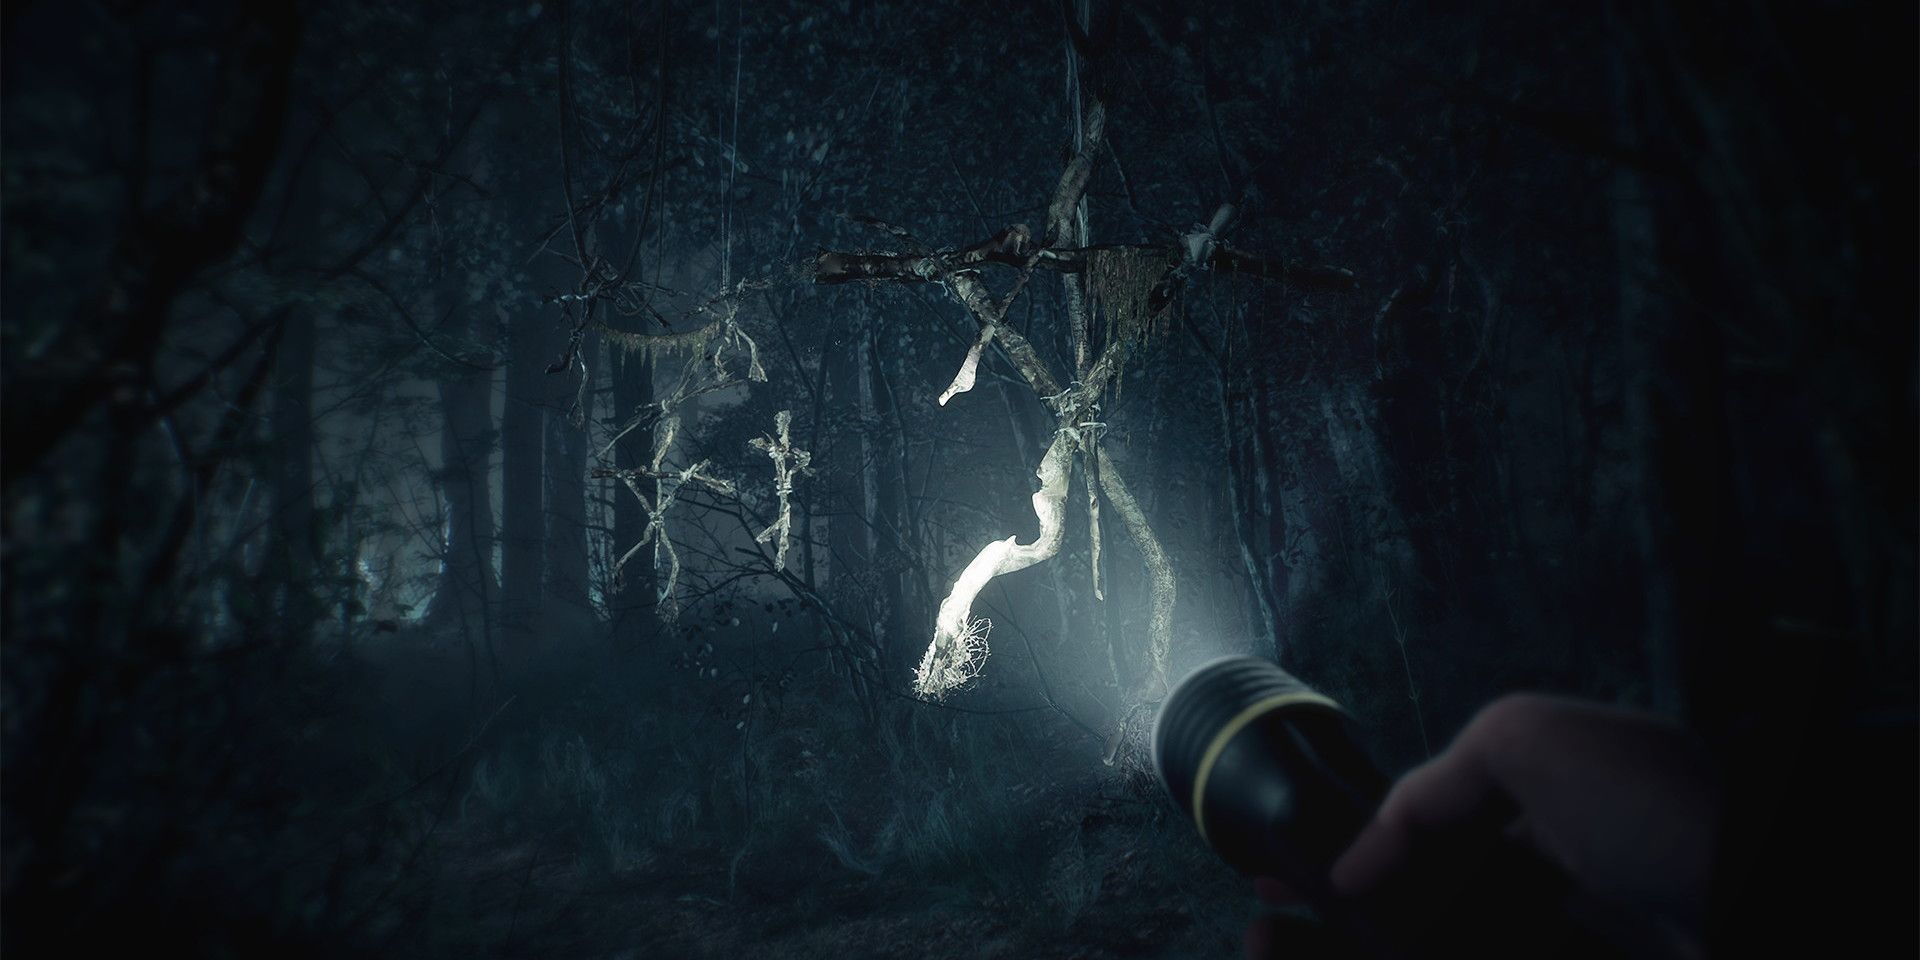 Blair Witch - Ellis Shining A Flashlight In The Middle Of A Dark, Creepy Woods